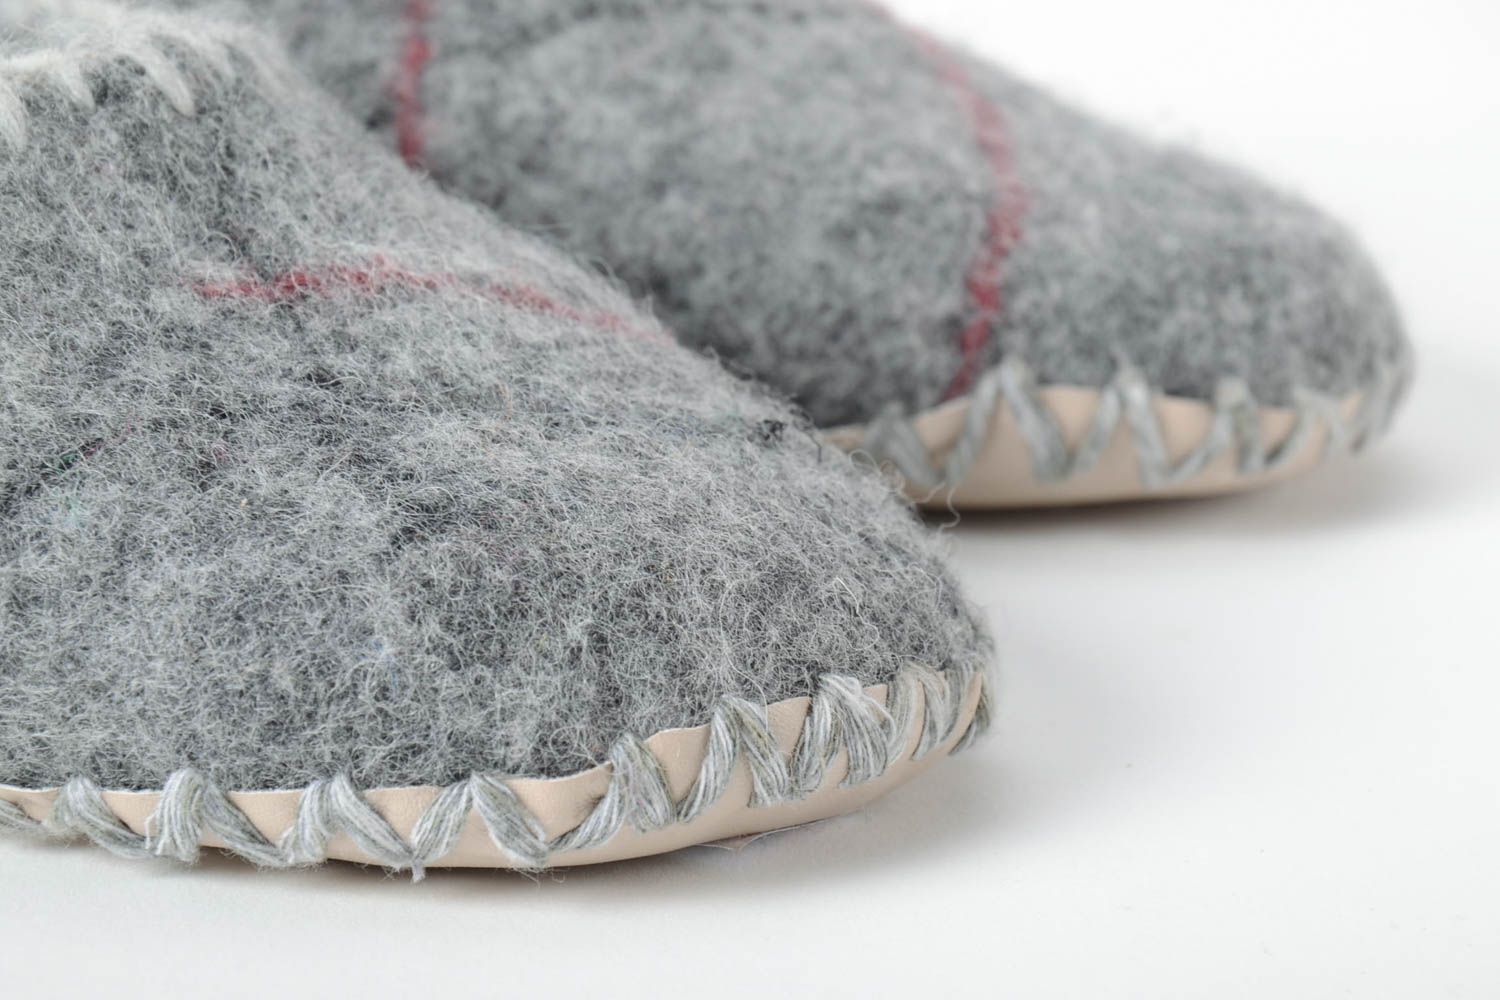 Handmade woolen slippers warm shoes for home unusual cute grey slippers photo 5